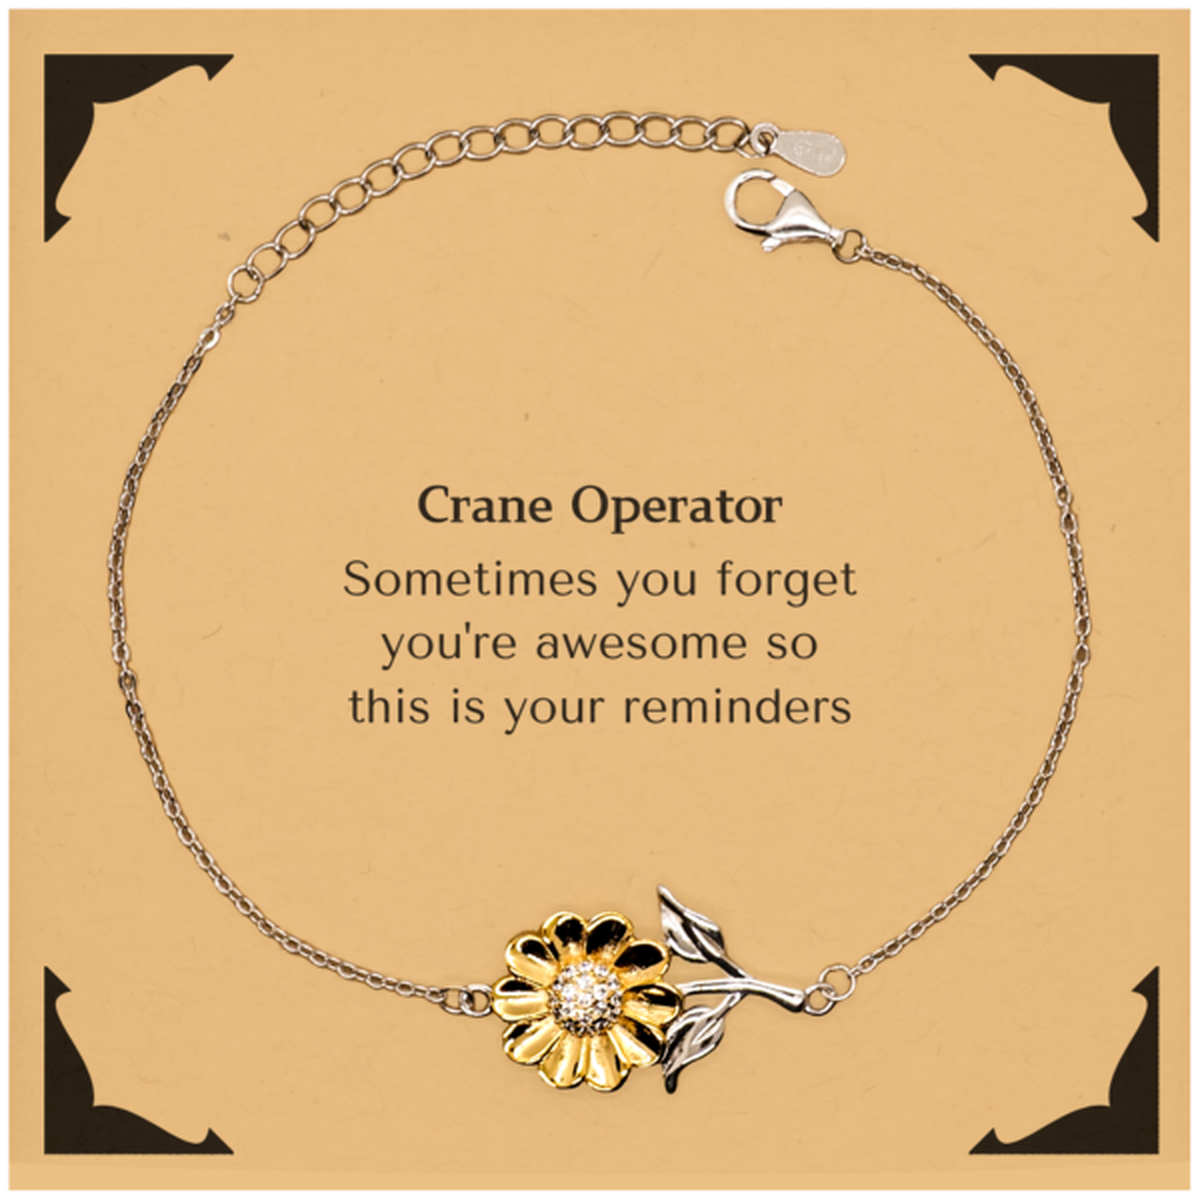 Sentimental Crane Operator Sunflower Bracelet, Crane Operator Sometimes you forget you're awesome so this is your reminders, Graduation Christmas Birthday Gifts for Crane Operator, Men, Women, Coworkers